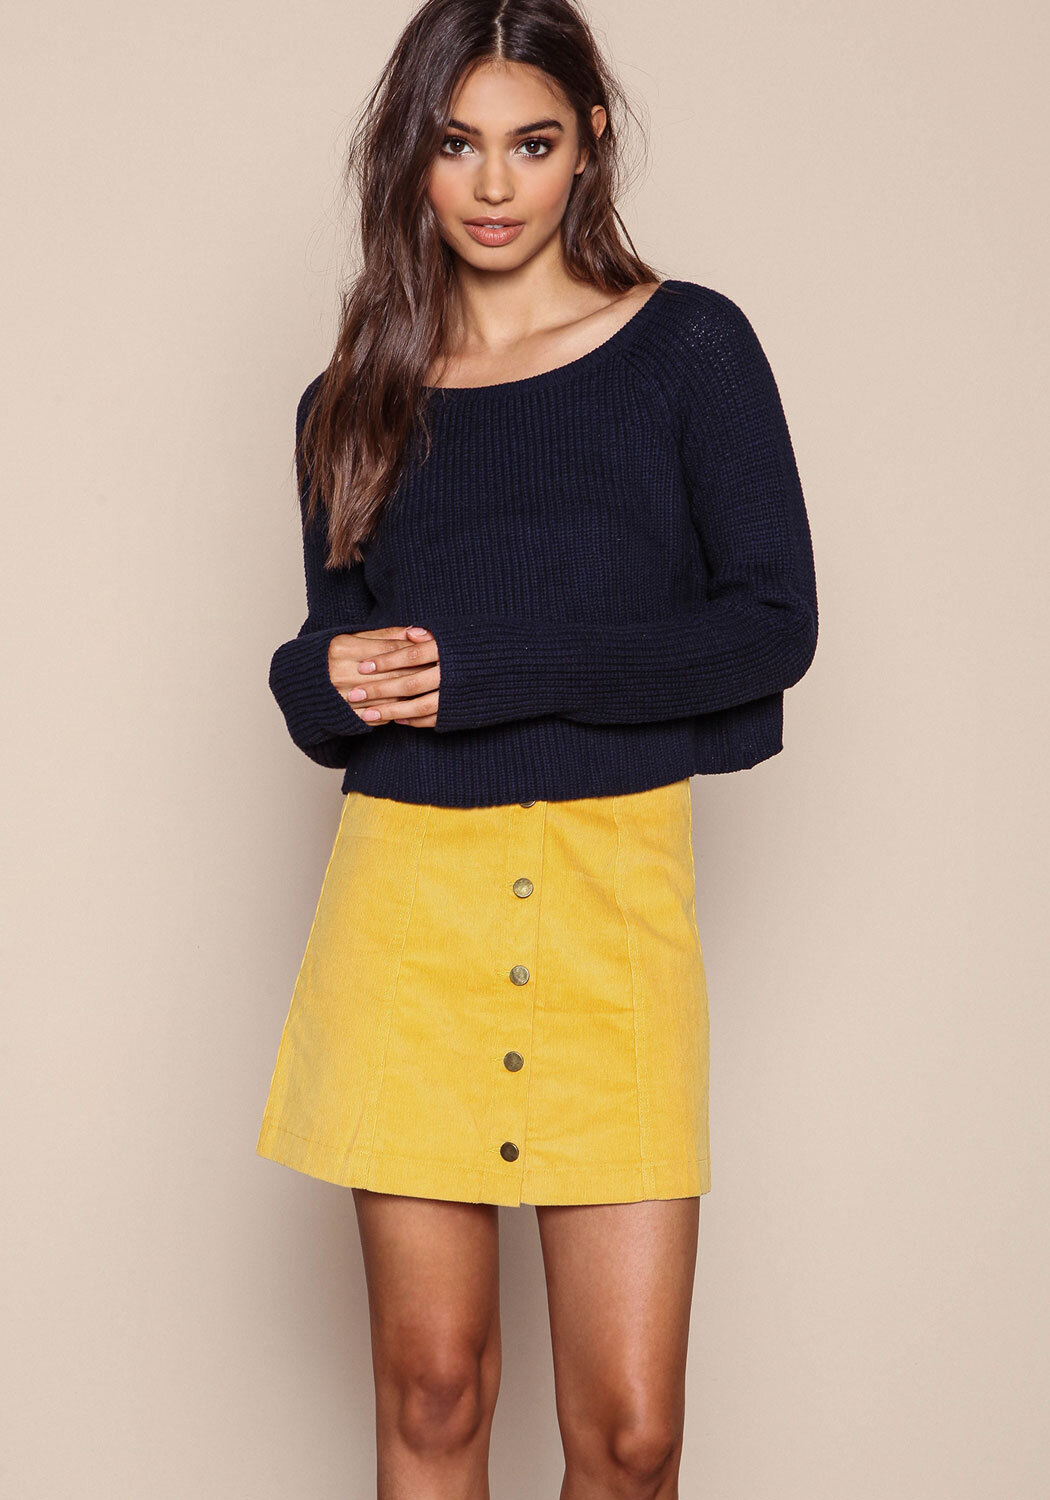 Junior Clothing | Navy Cropped Knit Sweater | Loveculture.com